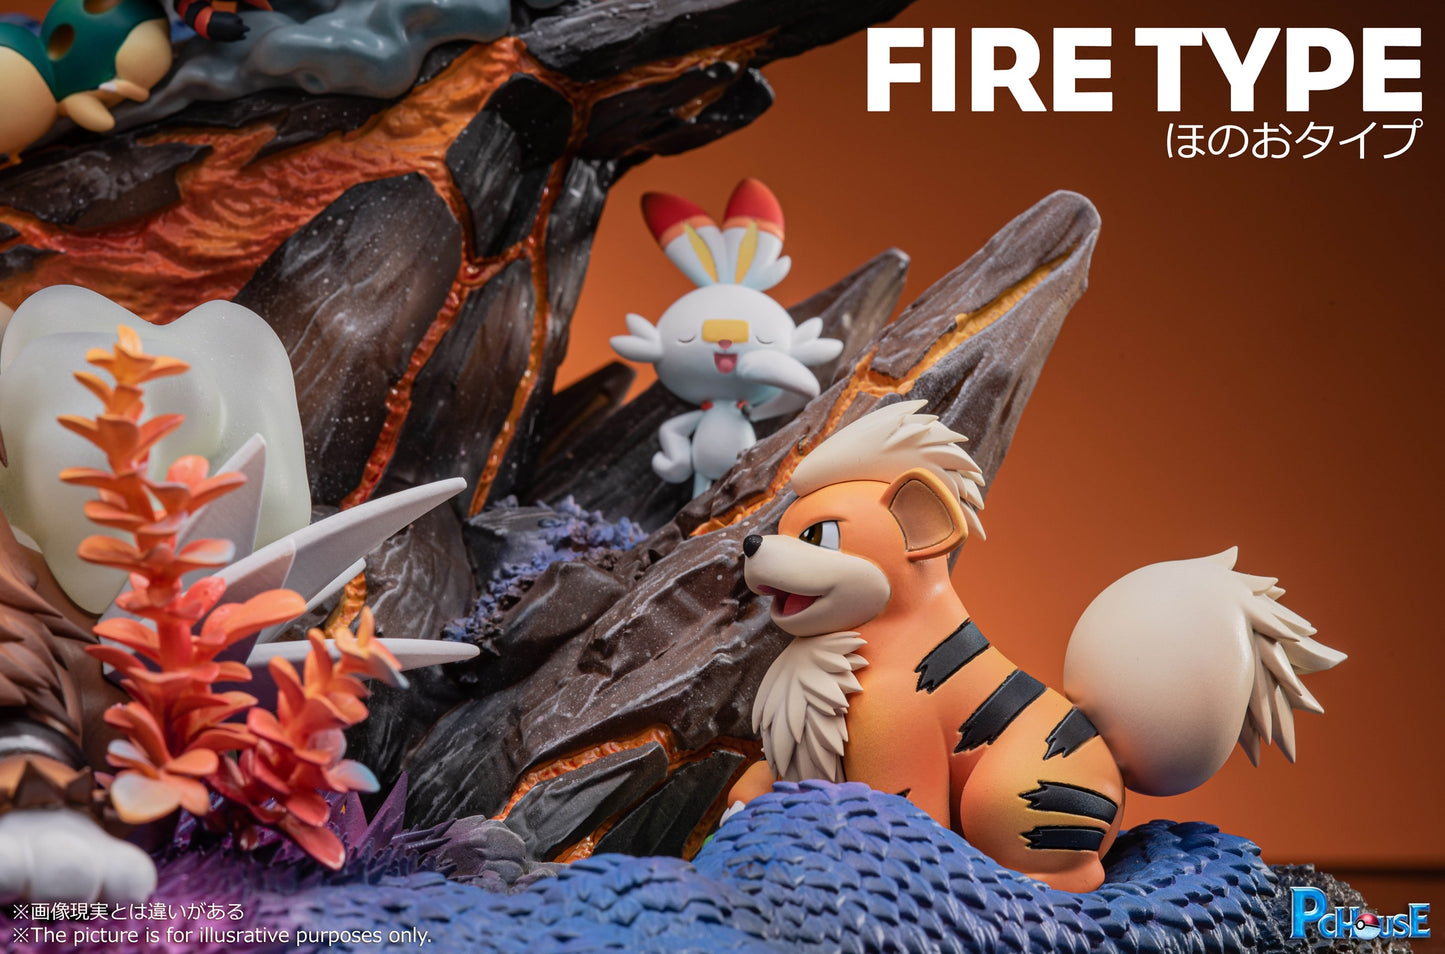 PC House - Fire Type Series [PRE-ORDER CLOSED]